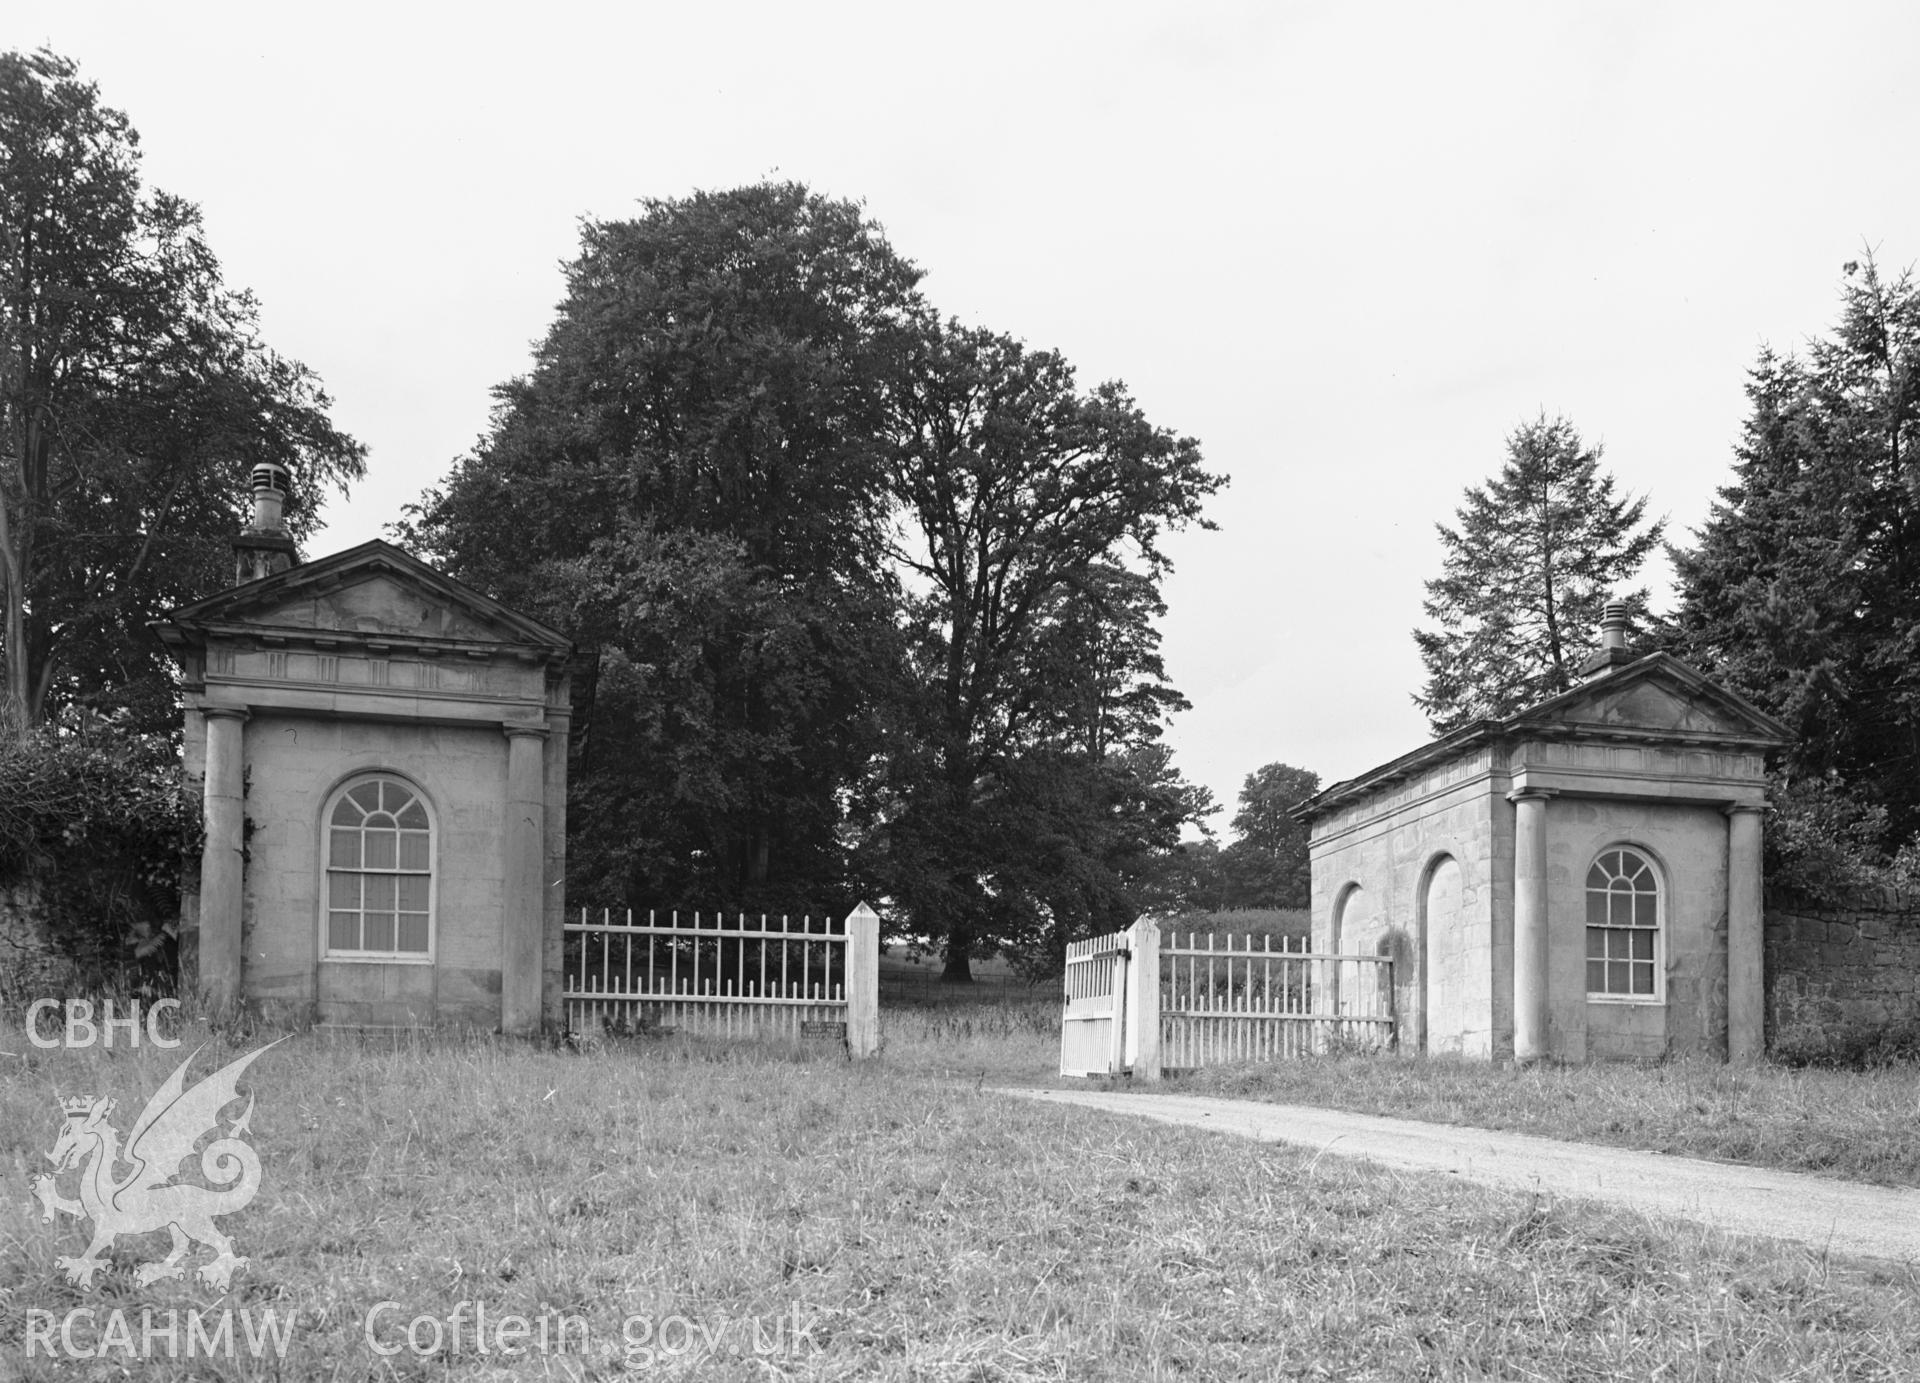 A single black and white photograph showing New Hall Lodge, Chirk Castle.  Negative held.